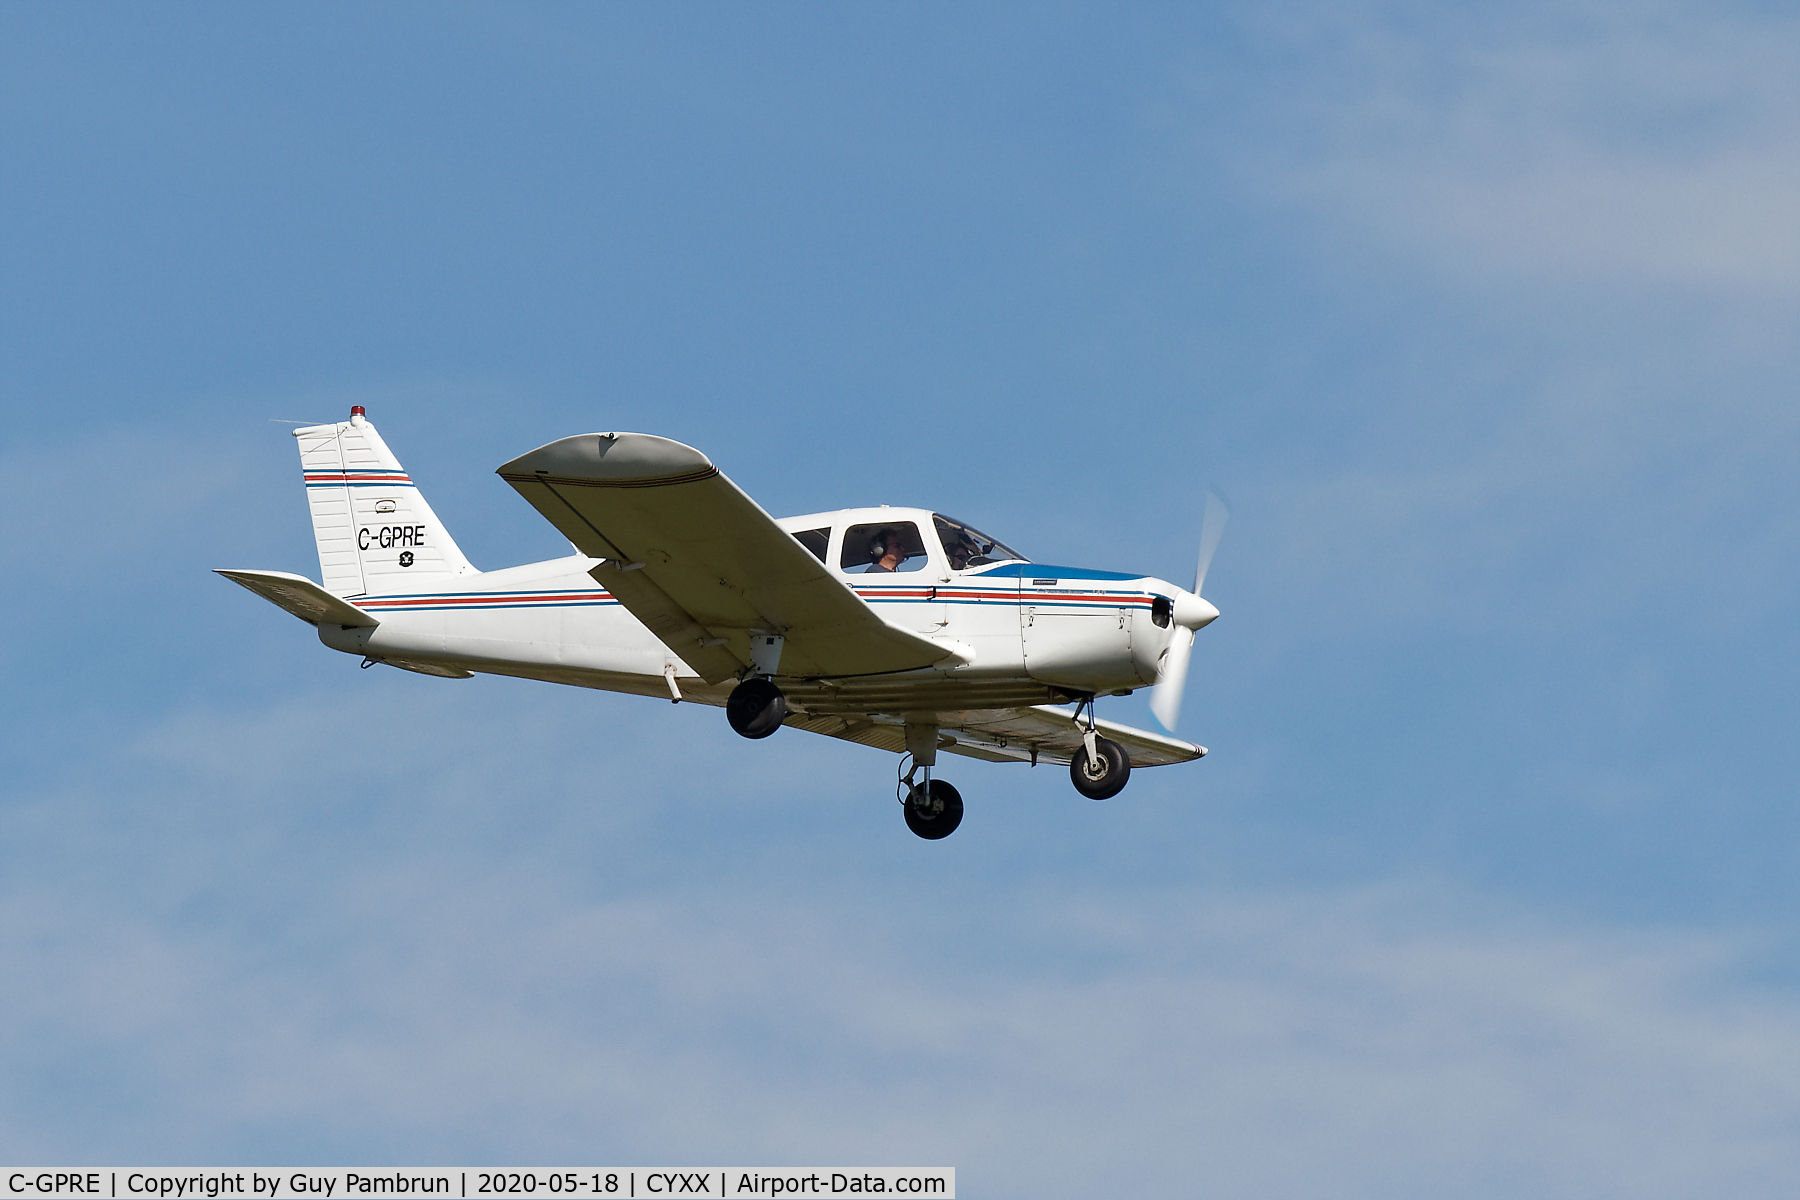 C-GPRE, 1967 Piper PA-28-140 Cherokee C/N 28 22528, Landing on 19 for pilot briefing and departure to take part in 